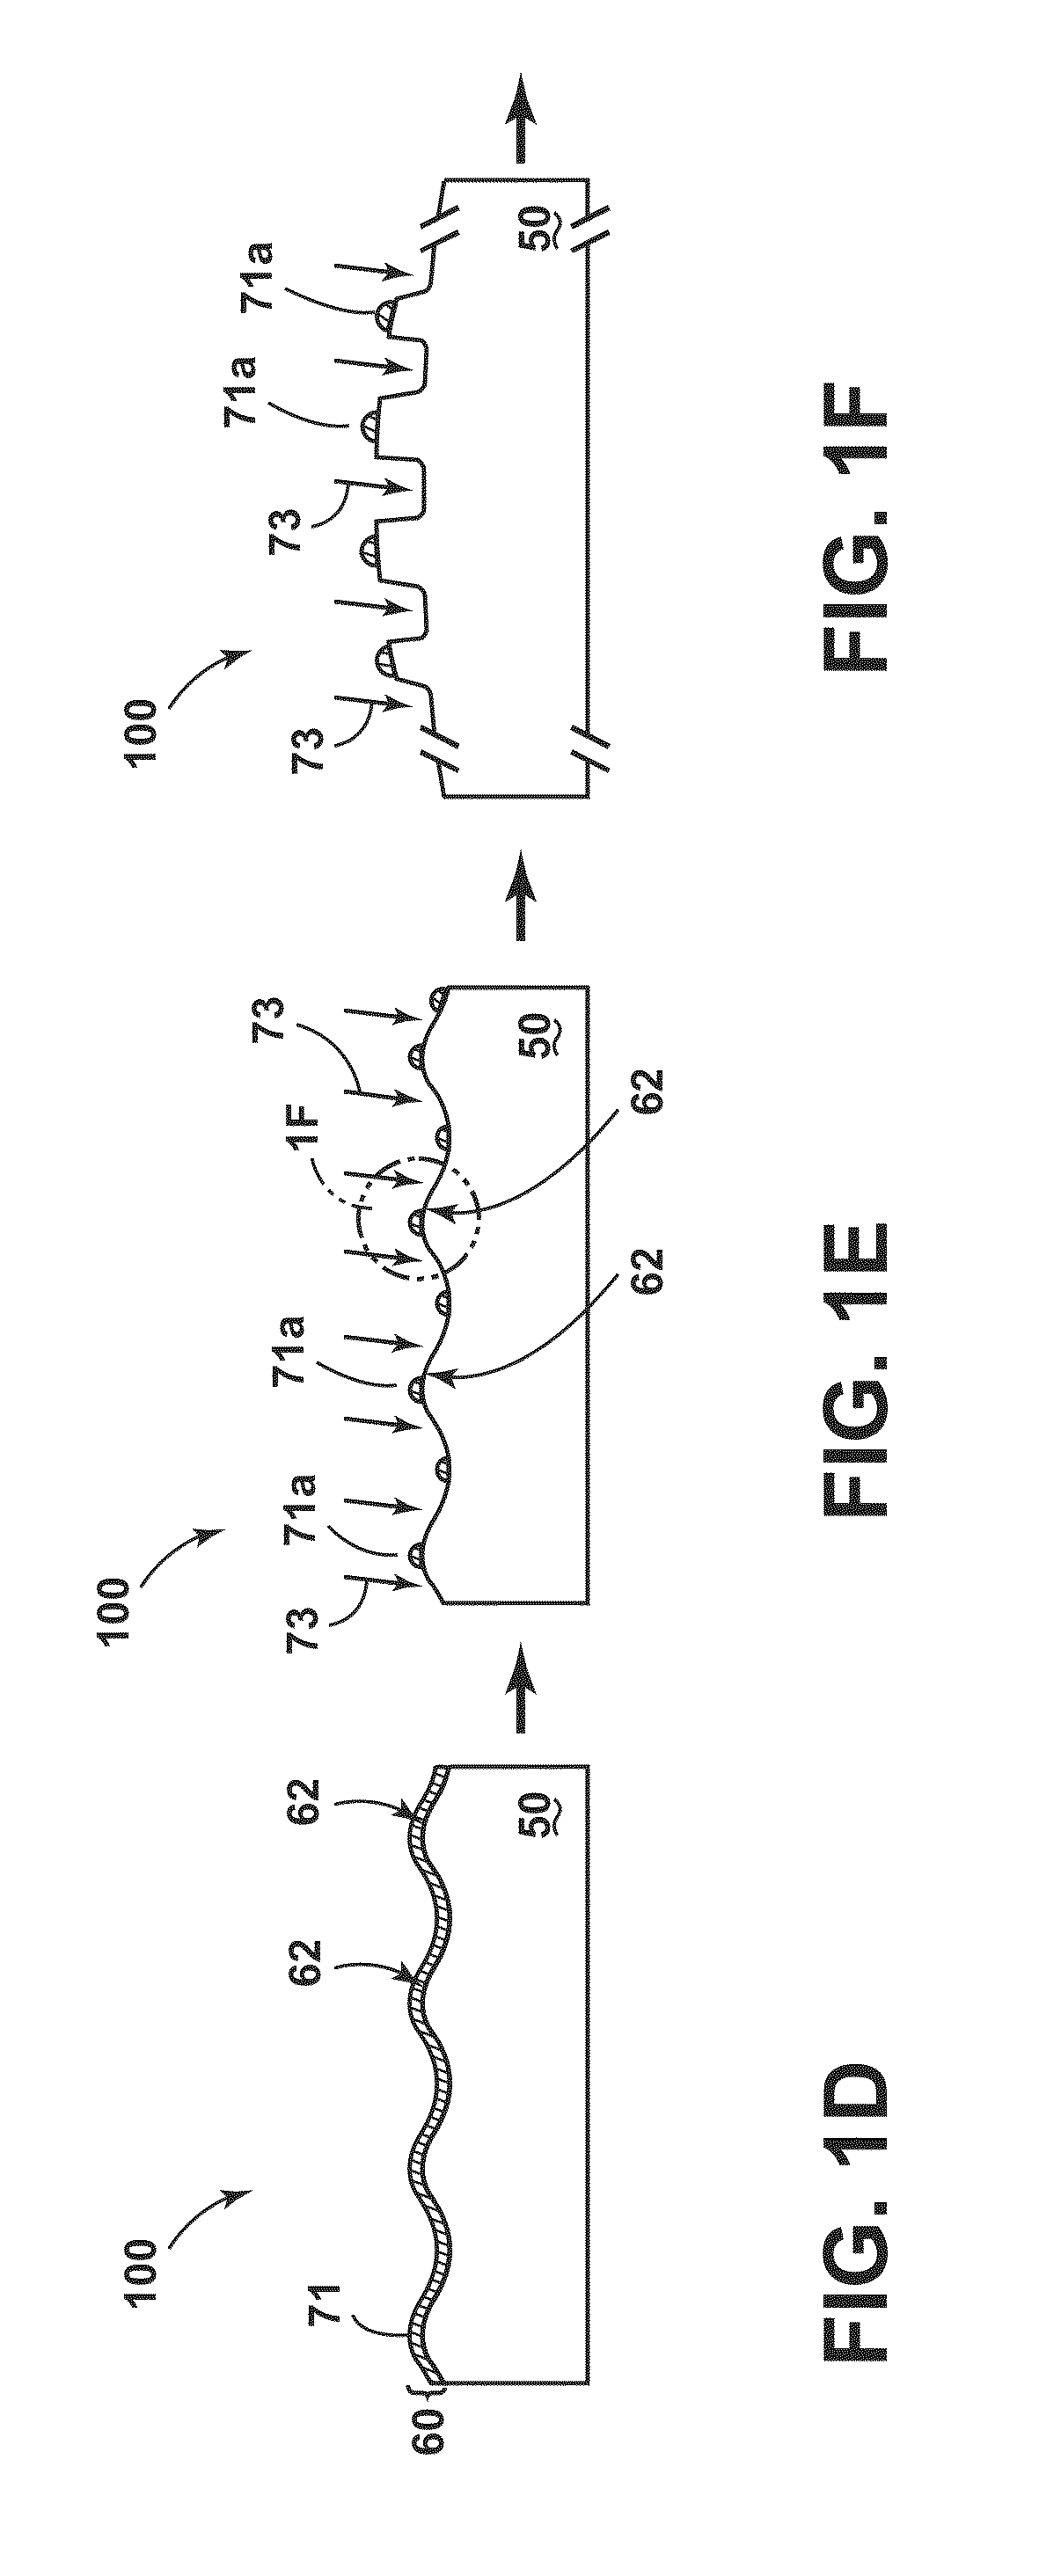 Articles with monolithic, structured surfaces and methods for making and using same